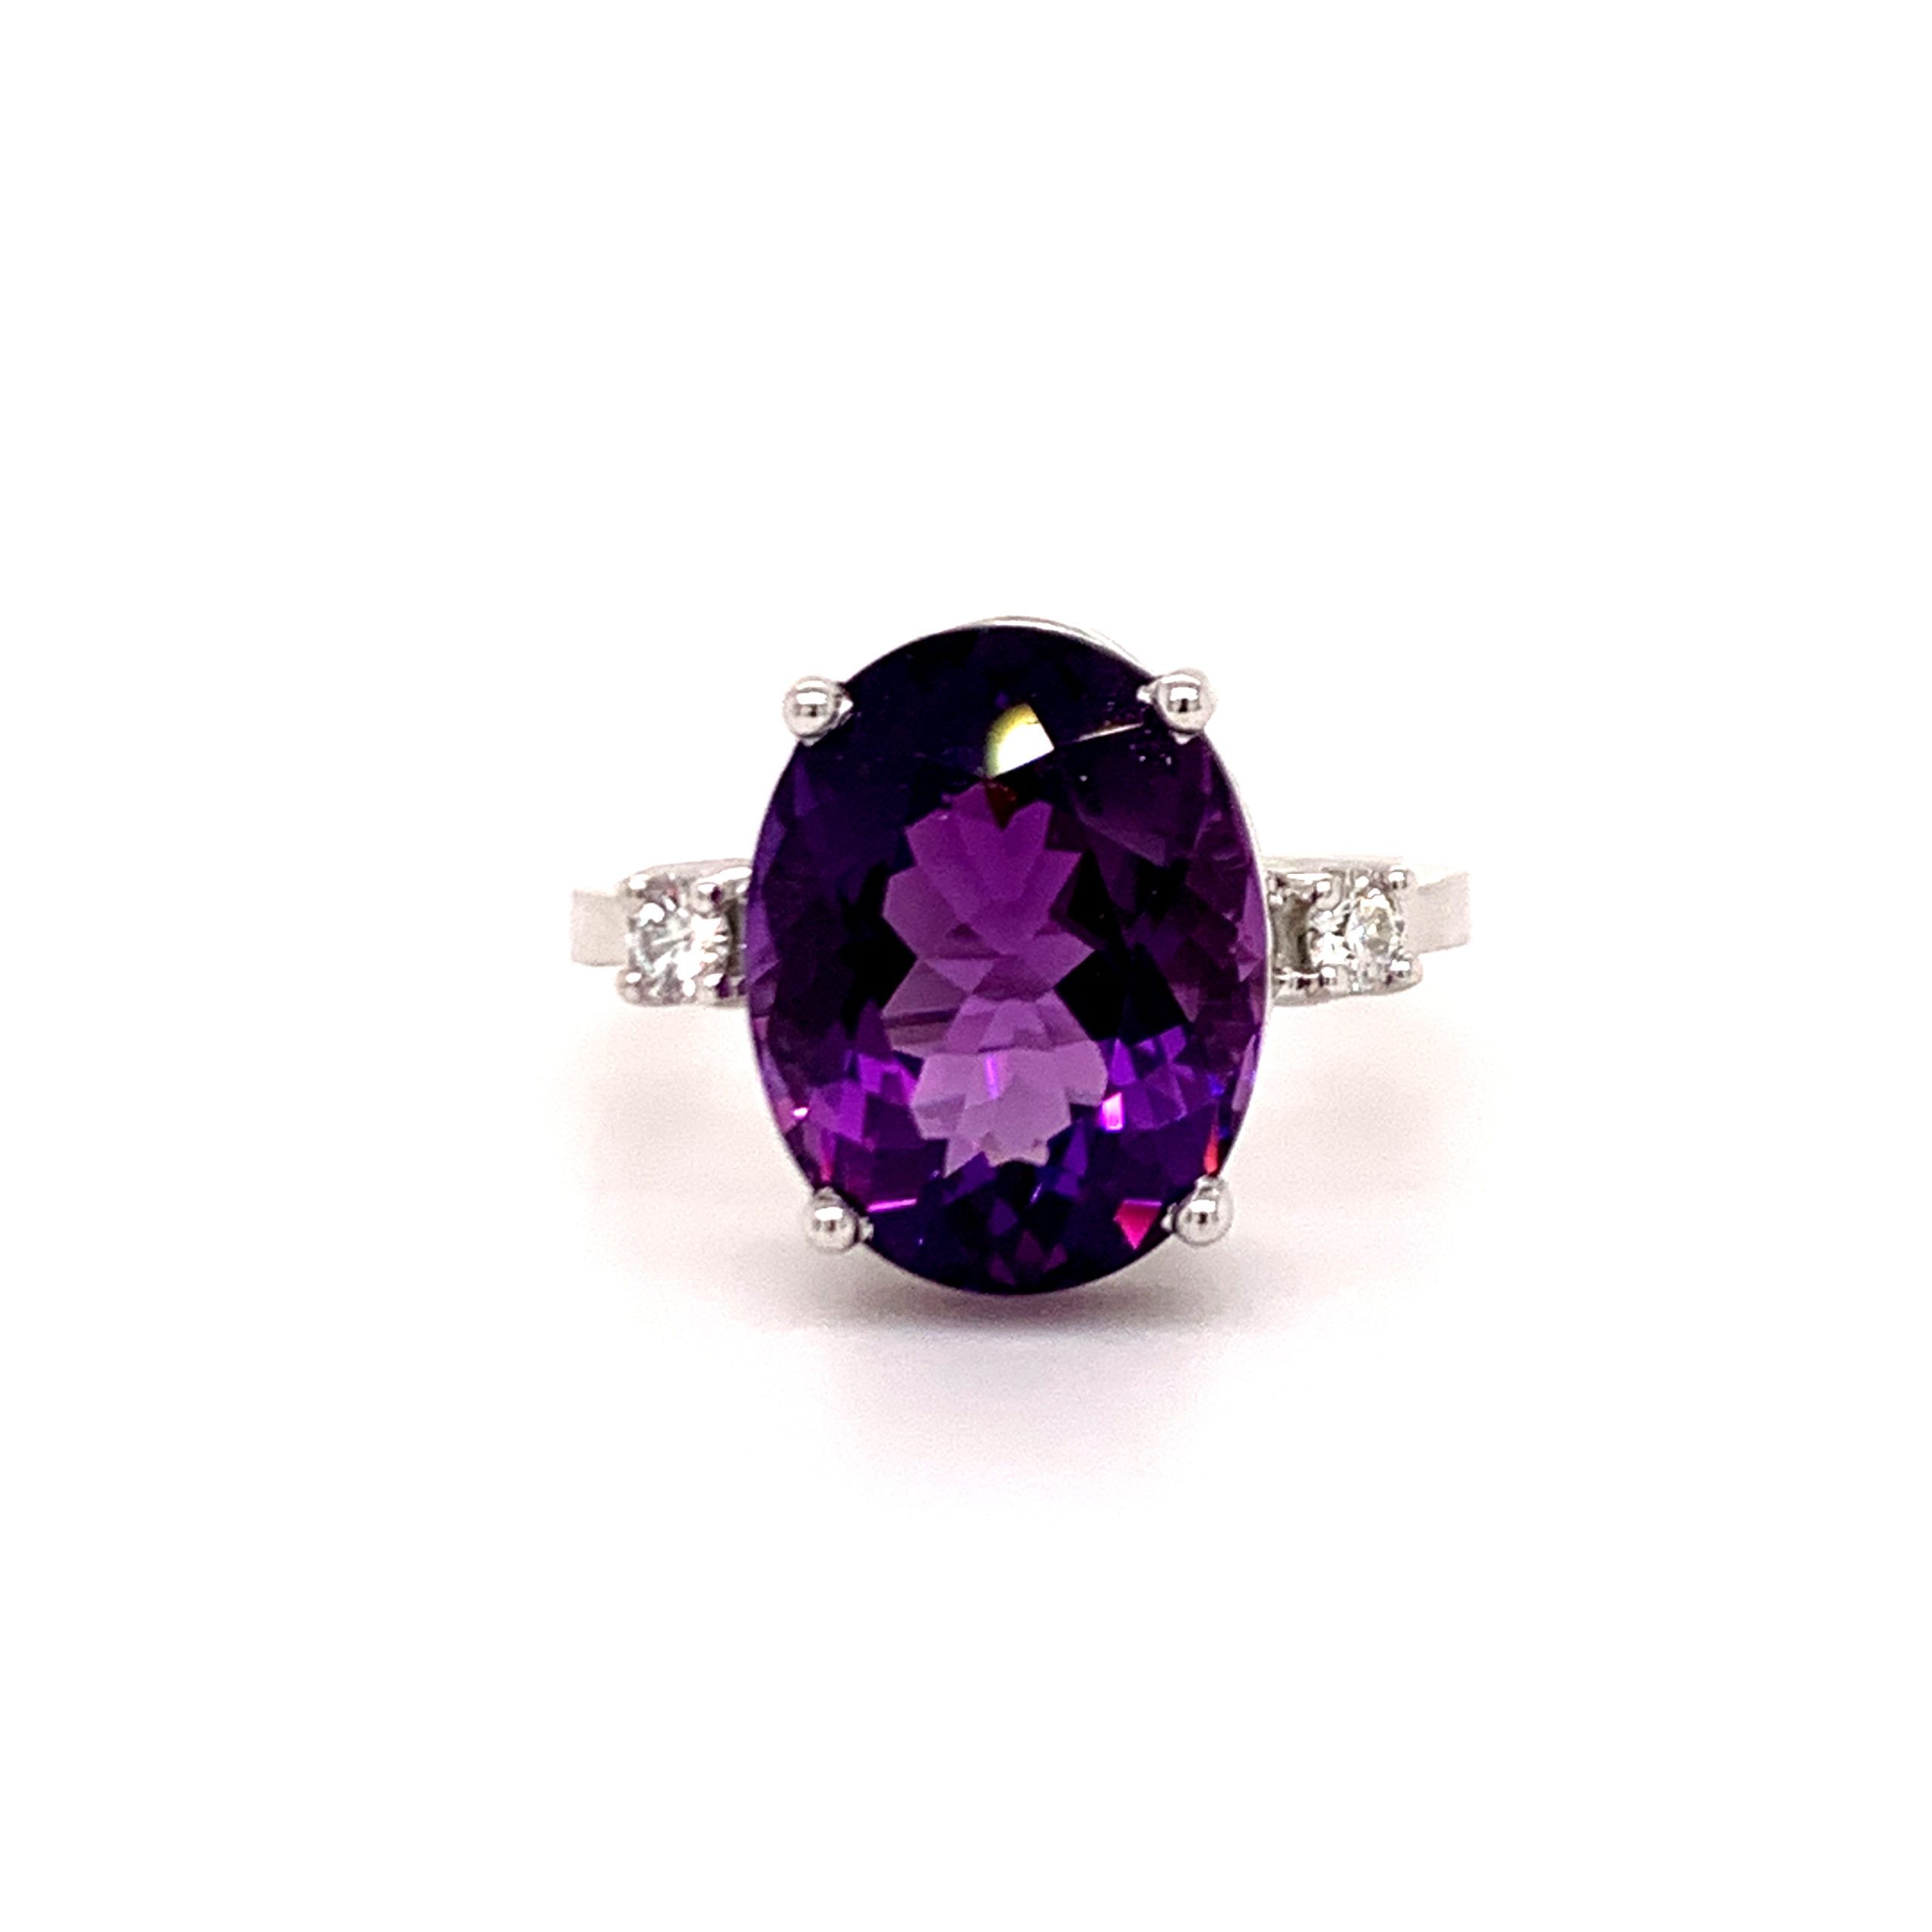 Herteen And Stocker Jewelers With Regard To Amethyst And Diamonds Rings (View 24 of 25)